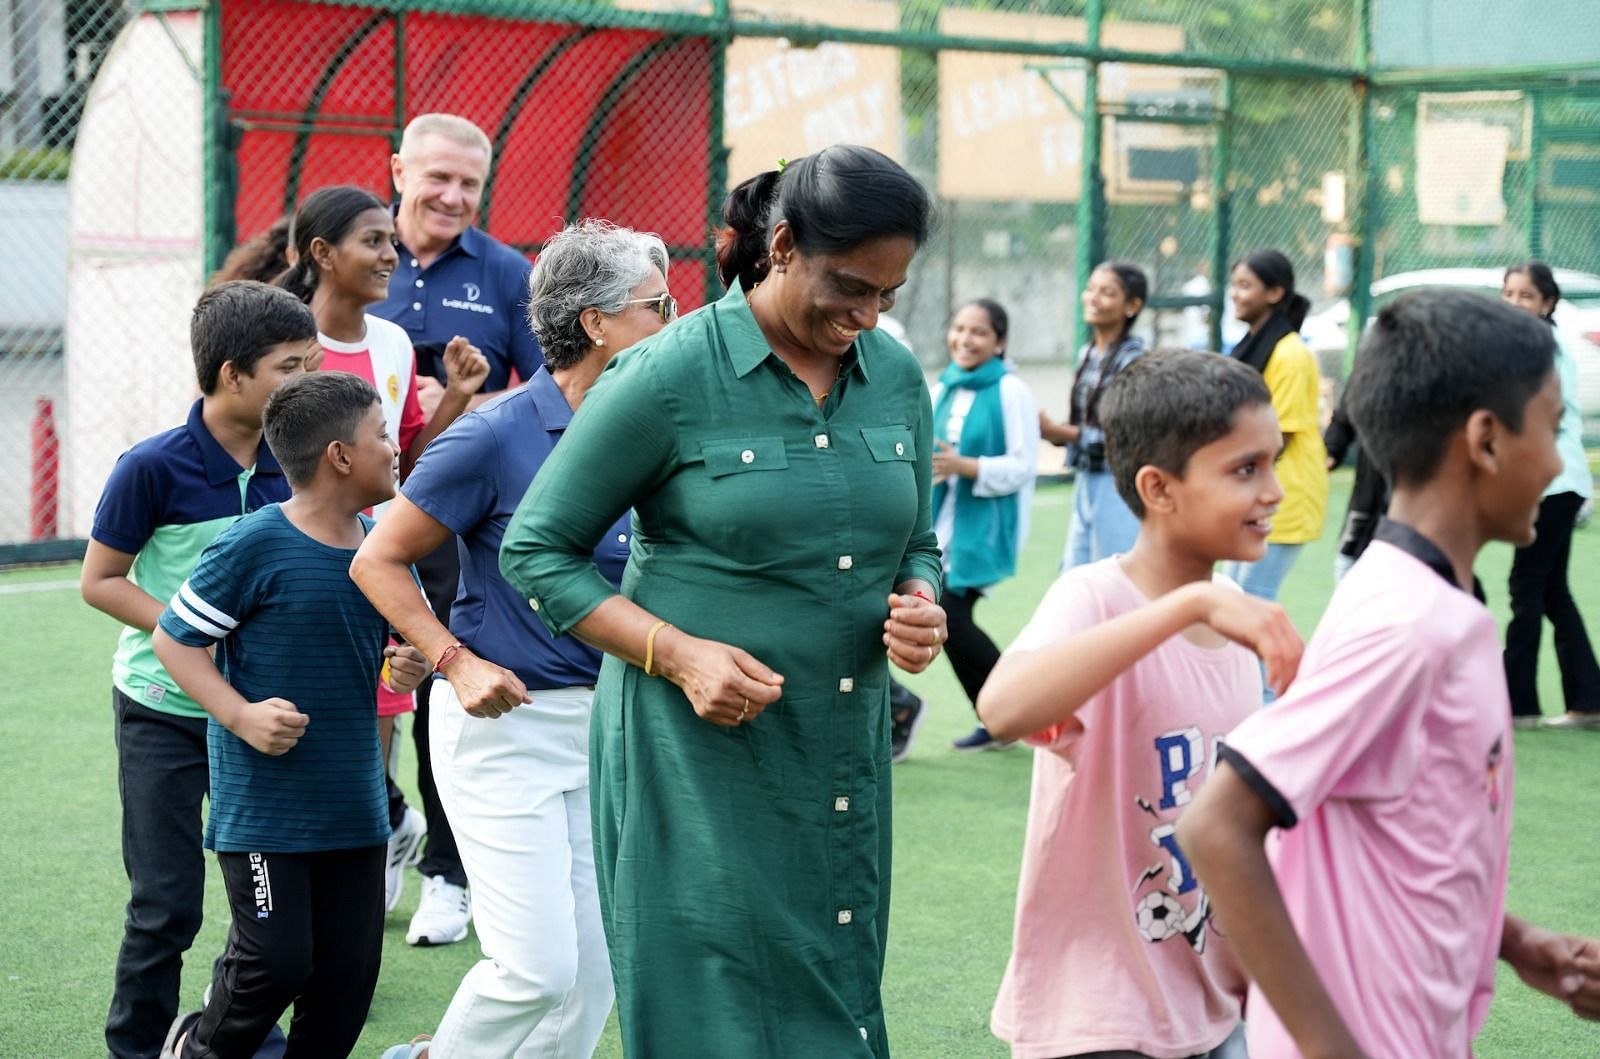 El Moutawakel and PT Usha engaging with the children